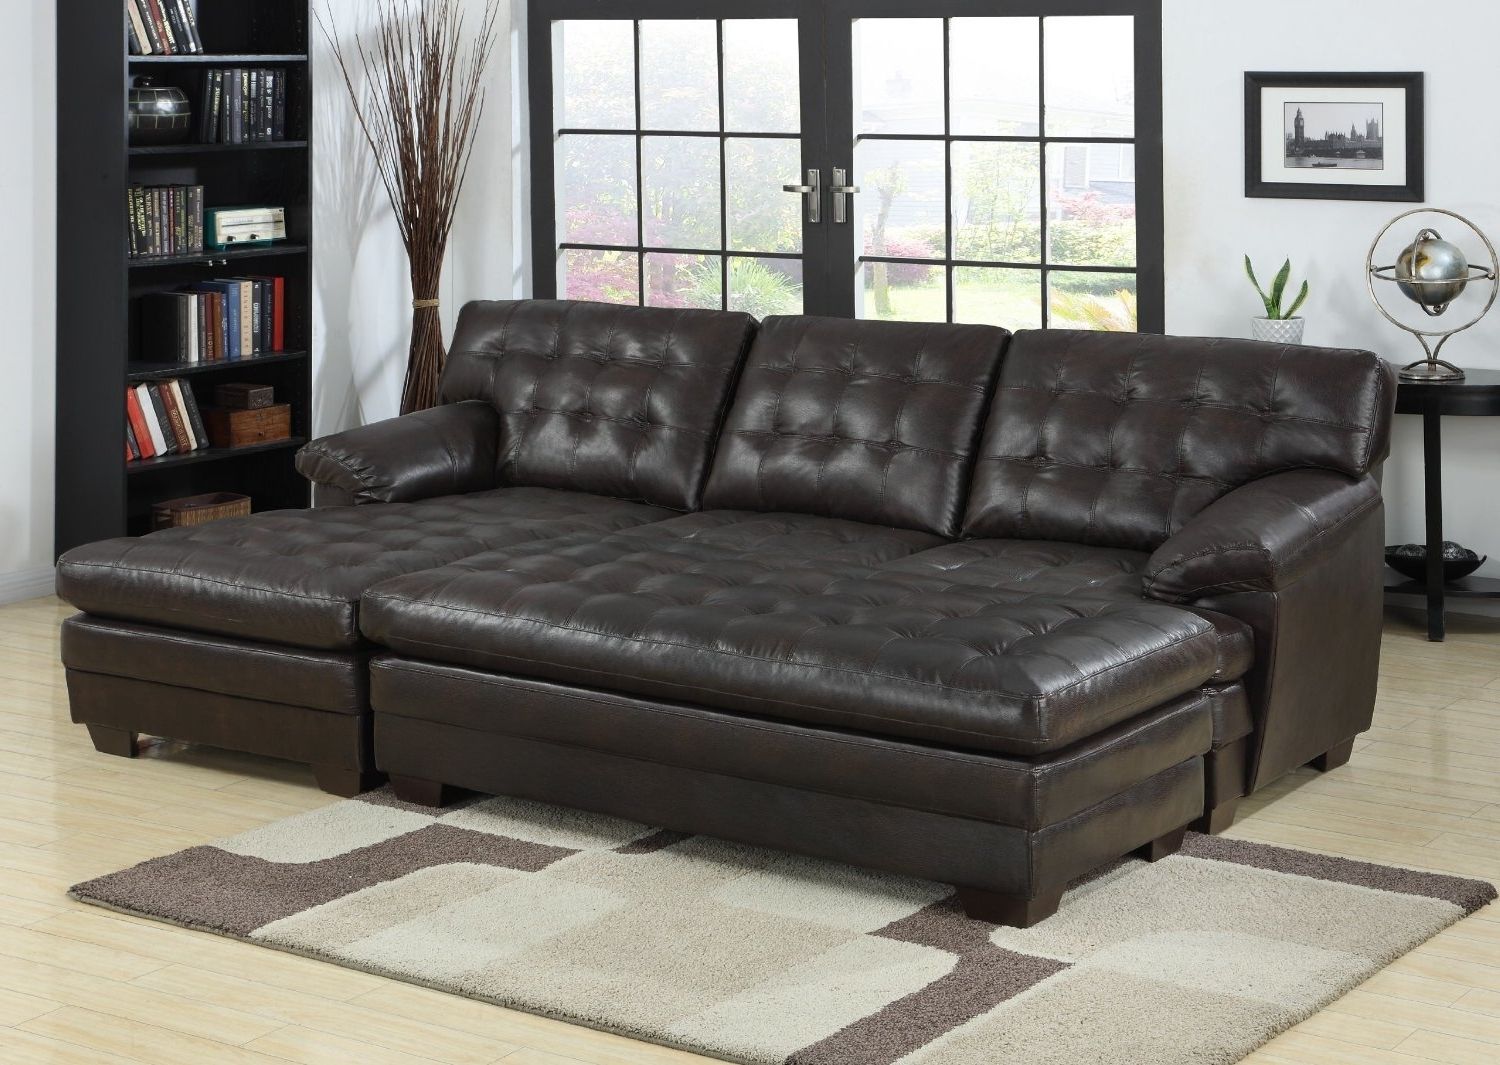 Widely Used Living Room : Leather Chaise Lounge Wicker Chaise Lounge Small Intended For Large Chaise Lounges (Photo 15 of 15)